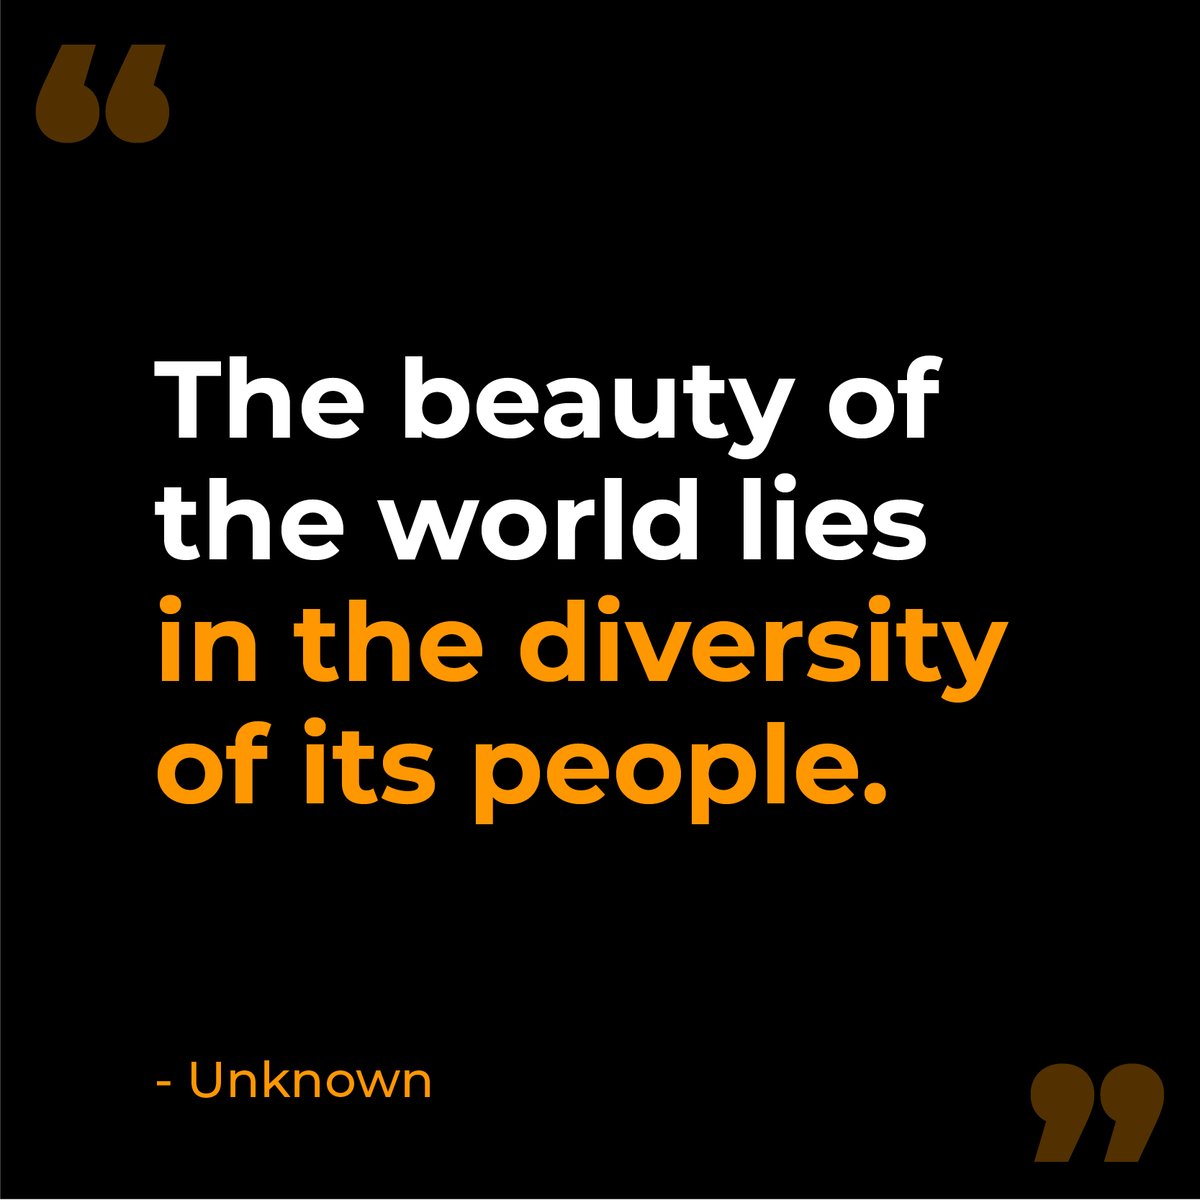 “In diversity there is beauty and there is strength.” - Maya Angelou

#CultureAndSociety
#CelebratingDiversity
#TheBeautyInDiversity